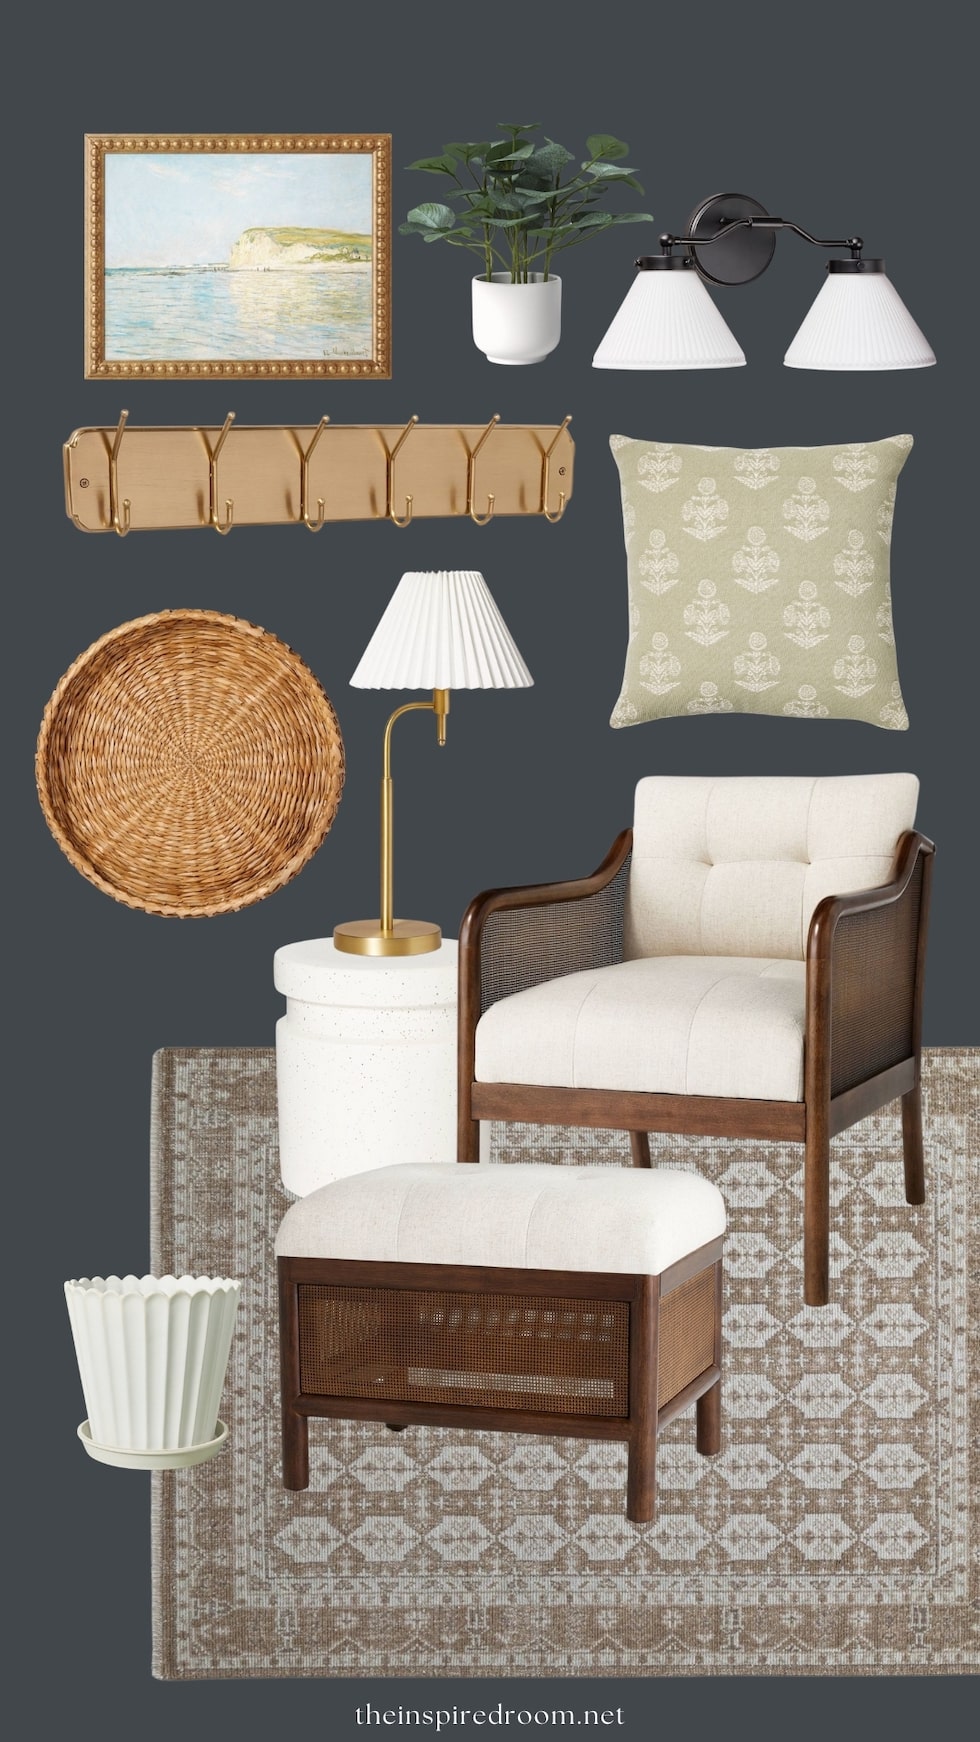 New Target Home Decor Finds + Style Mood Boards